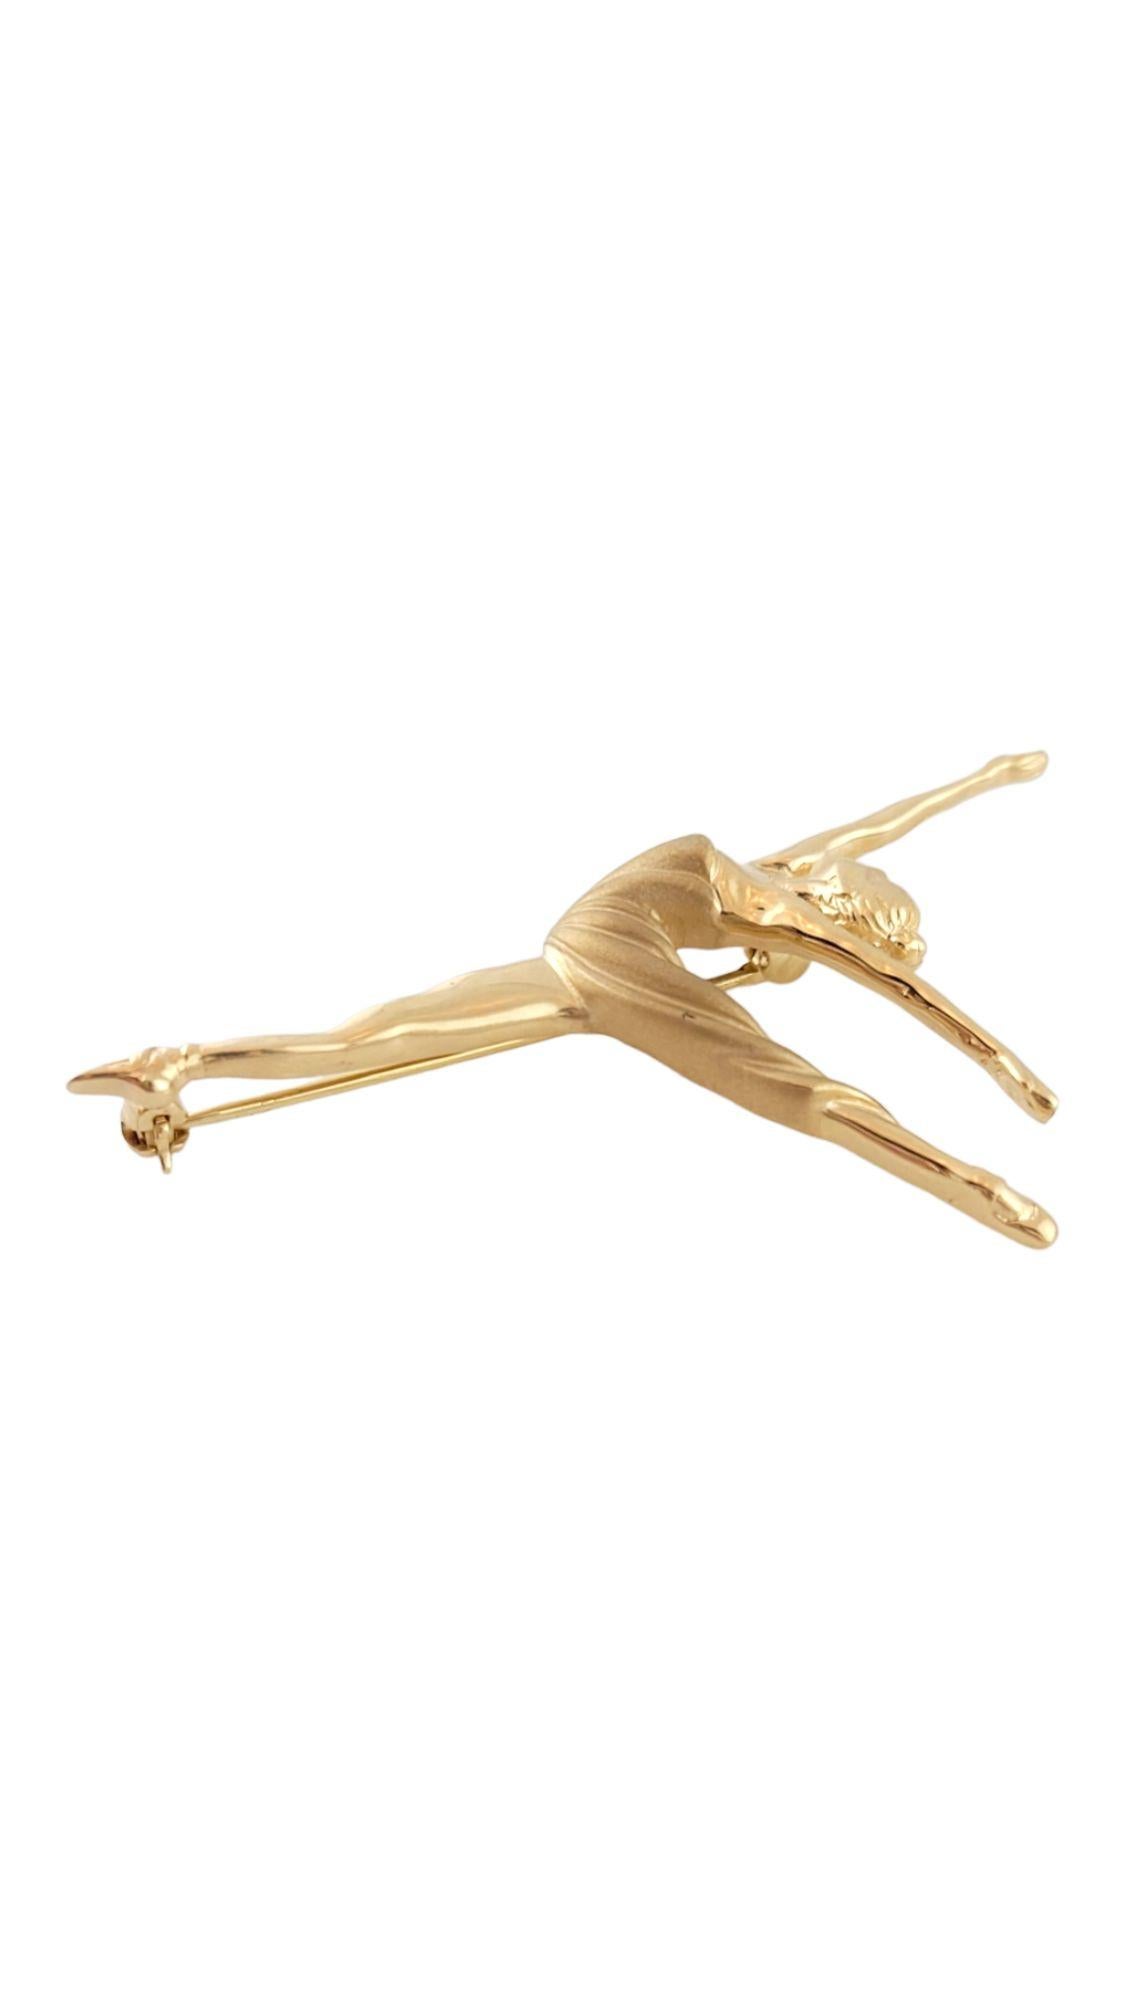 14K Yellow Gold Ballerina Dancer Pin #14627 In Good Condition For Sale In Washington Depot, CT